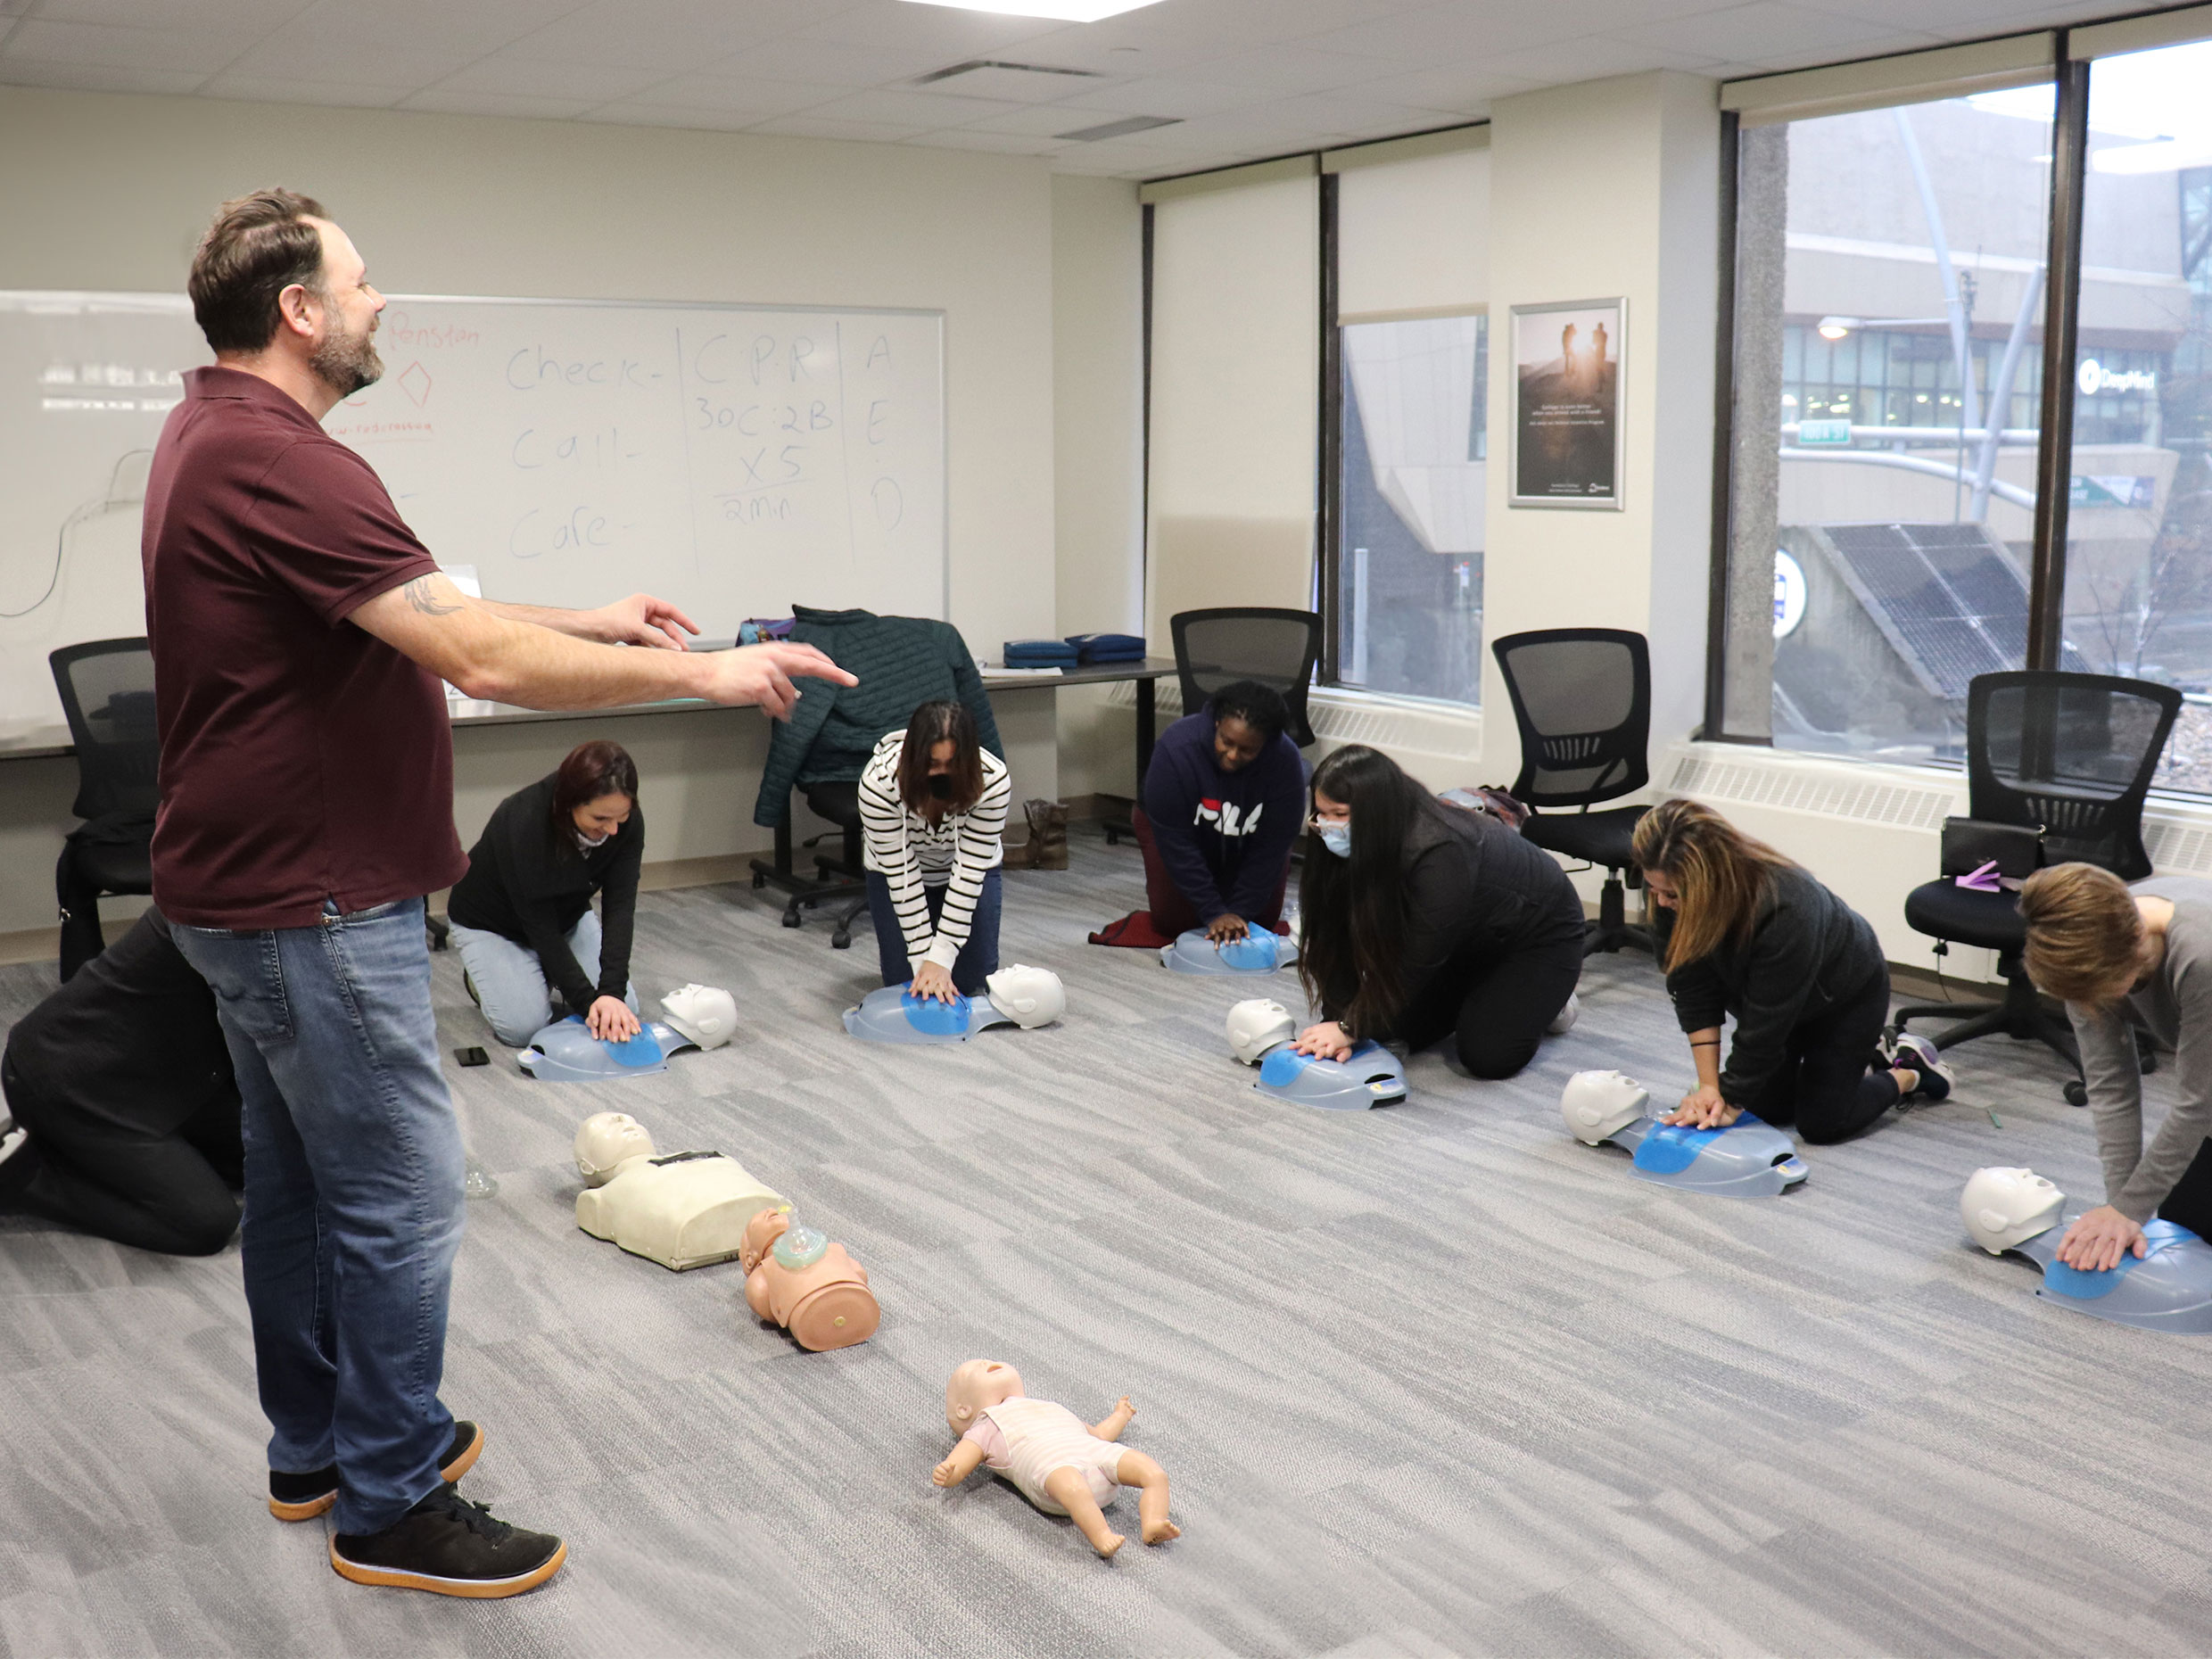 The CRP and First Aid course instructor standing in the middle of a classroom surrounded by students learning how to administer first aid on models on Sundance College's Edmonton campus.